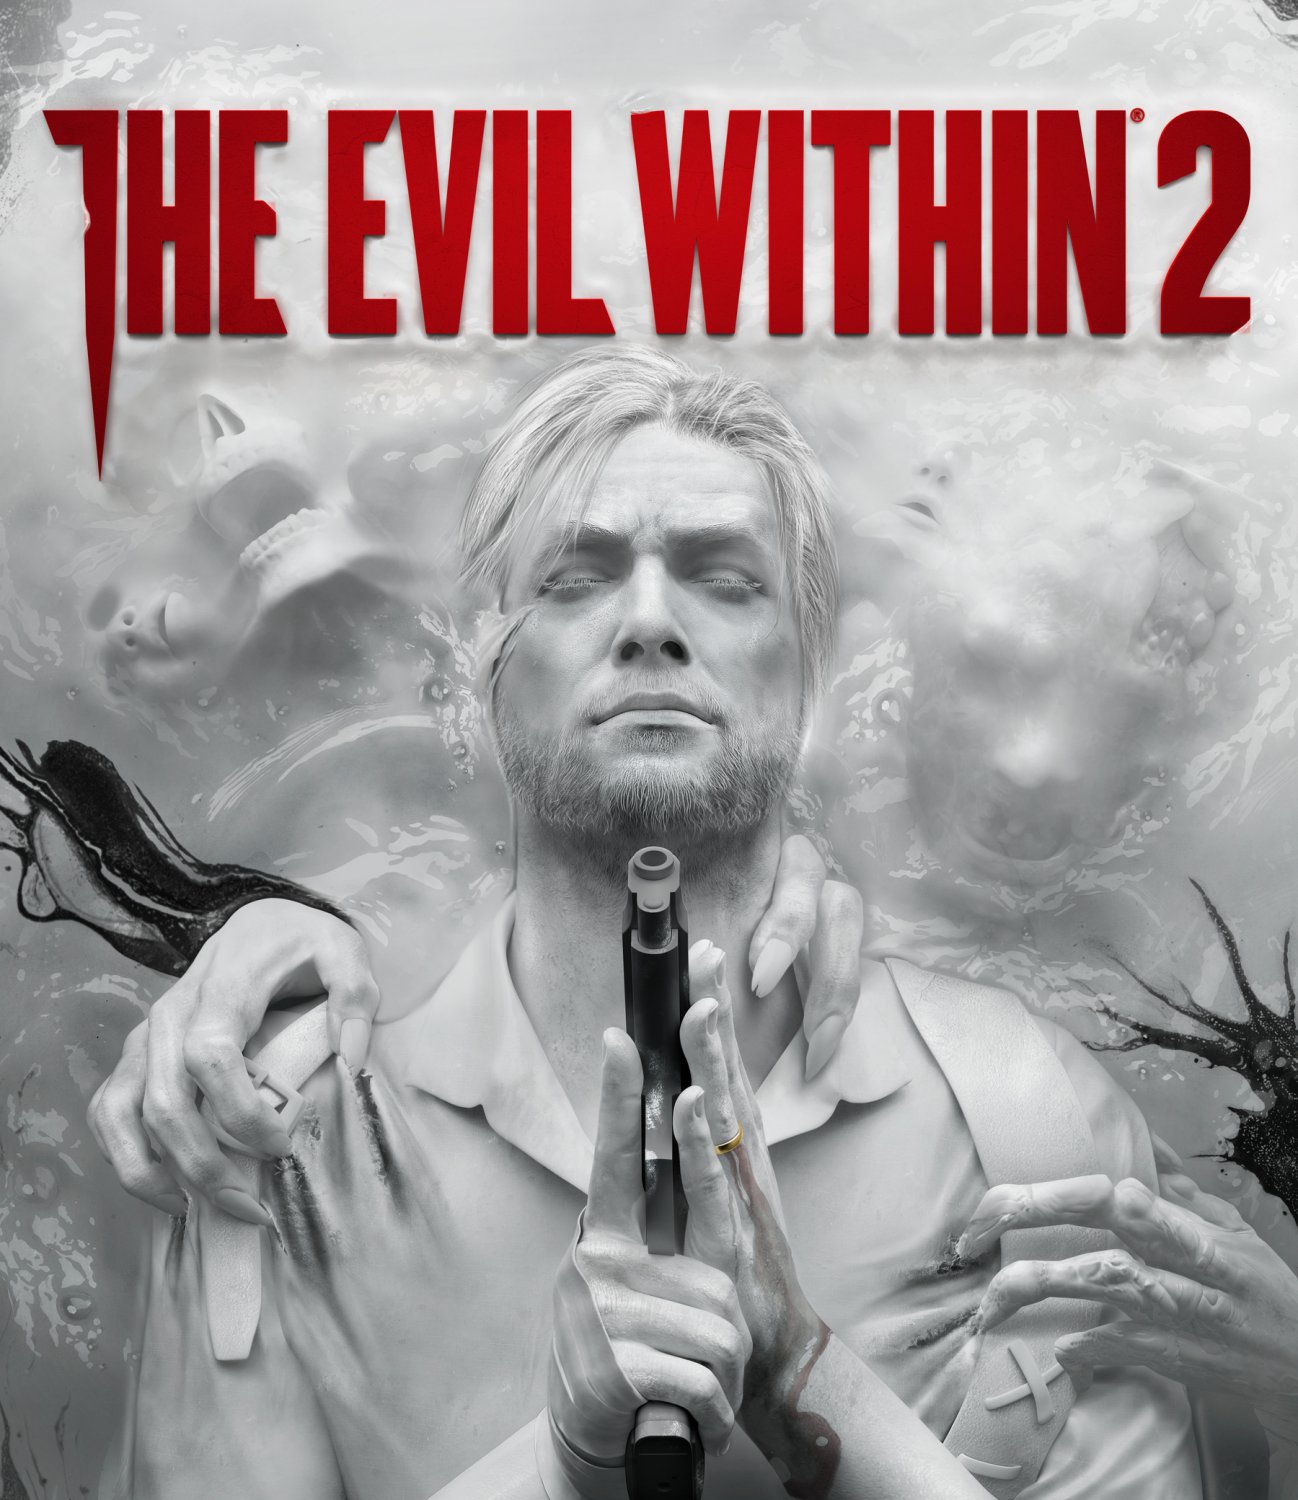 The Evil Within 2 13"x19" (32cm/49cm) Polyester Fabric Poster